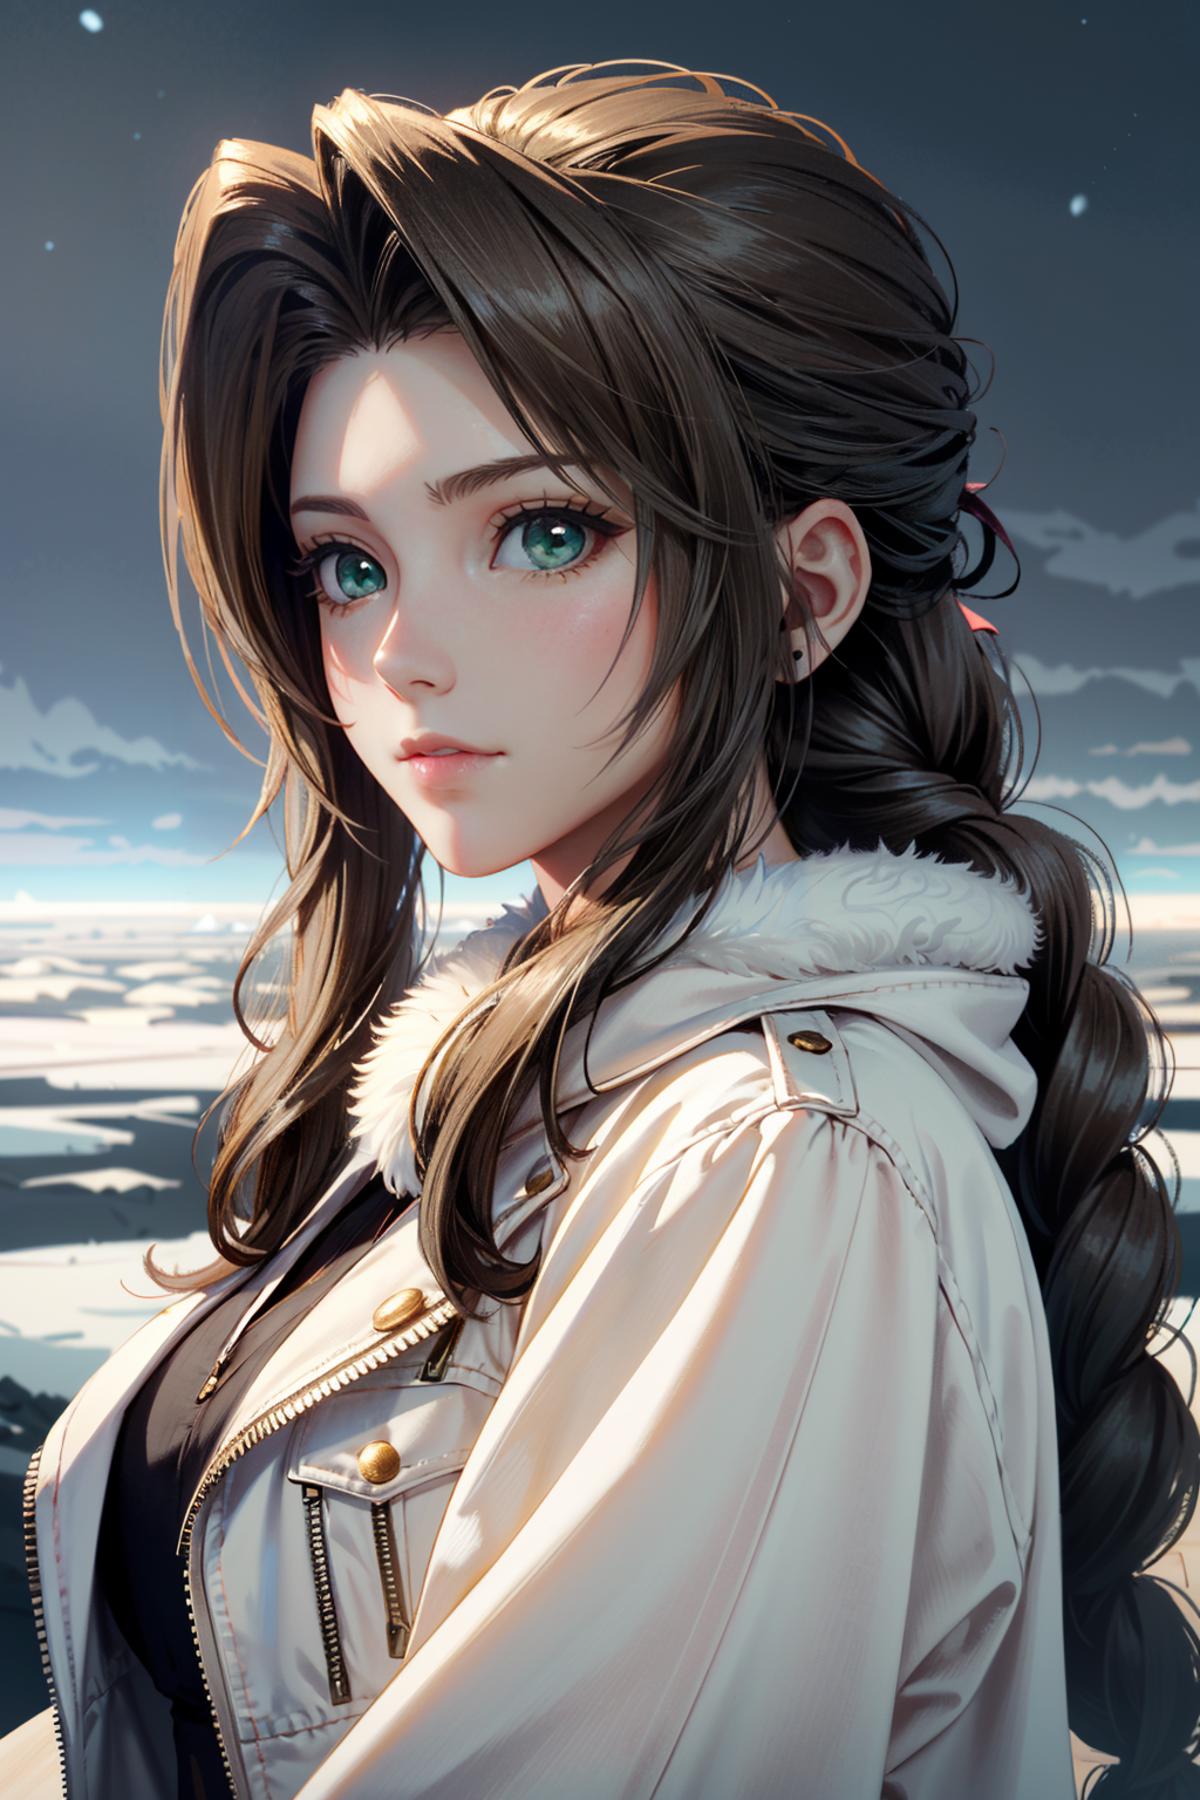 Aerith from Final Fantasy 7 image by BloodRedKittie